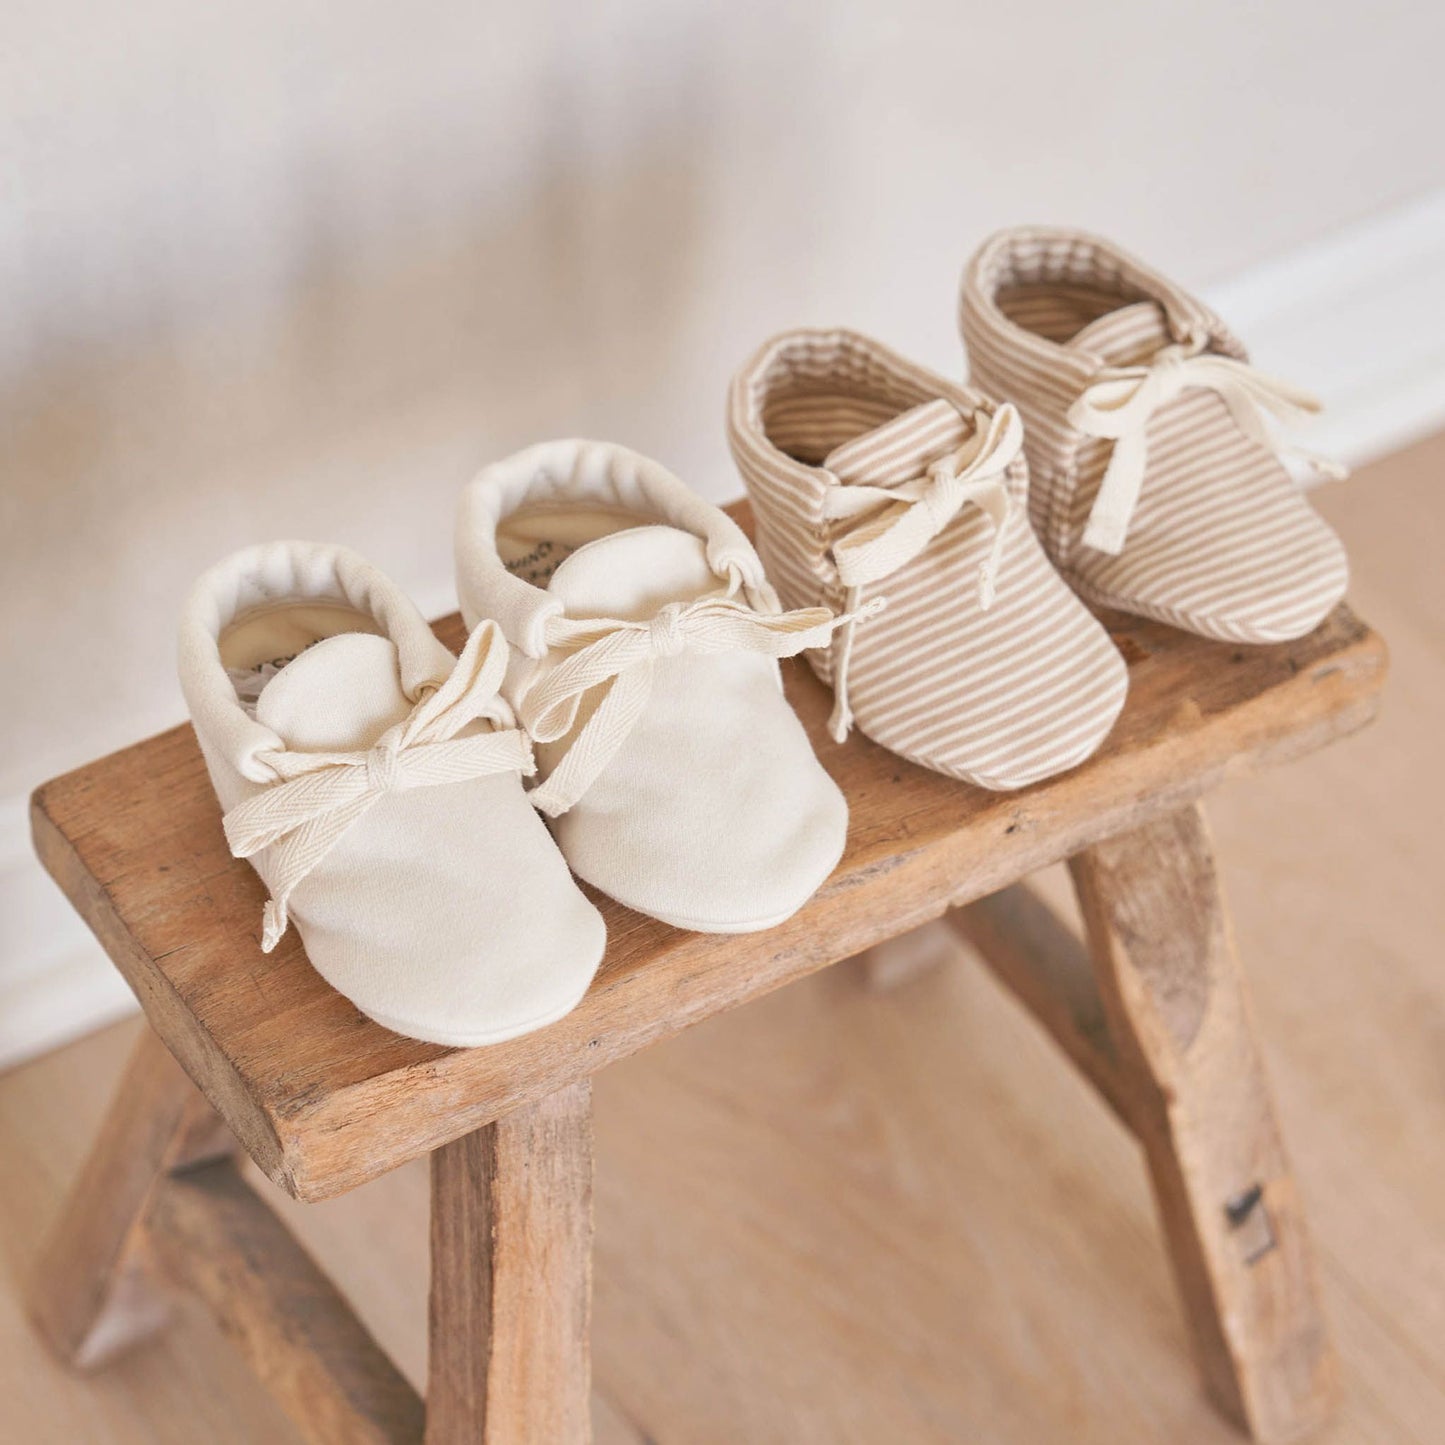 Quincy Mae Baby Booties - Ivory